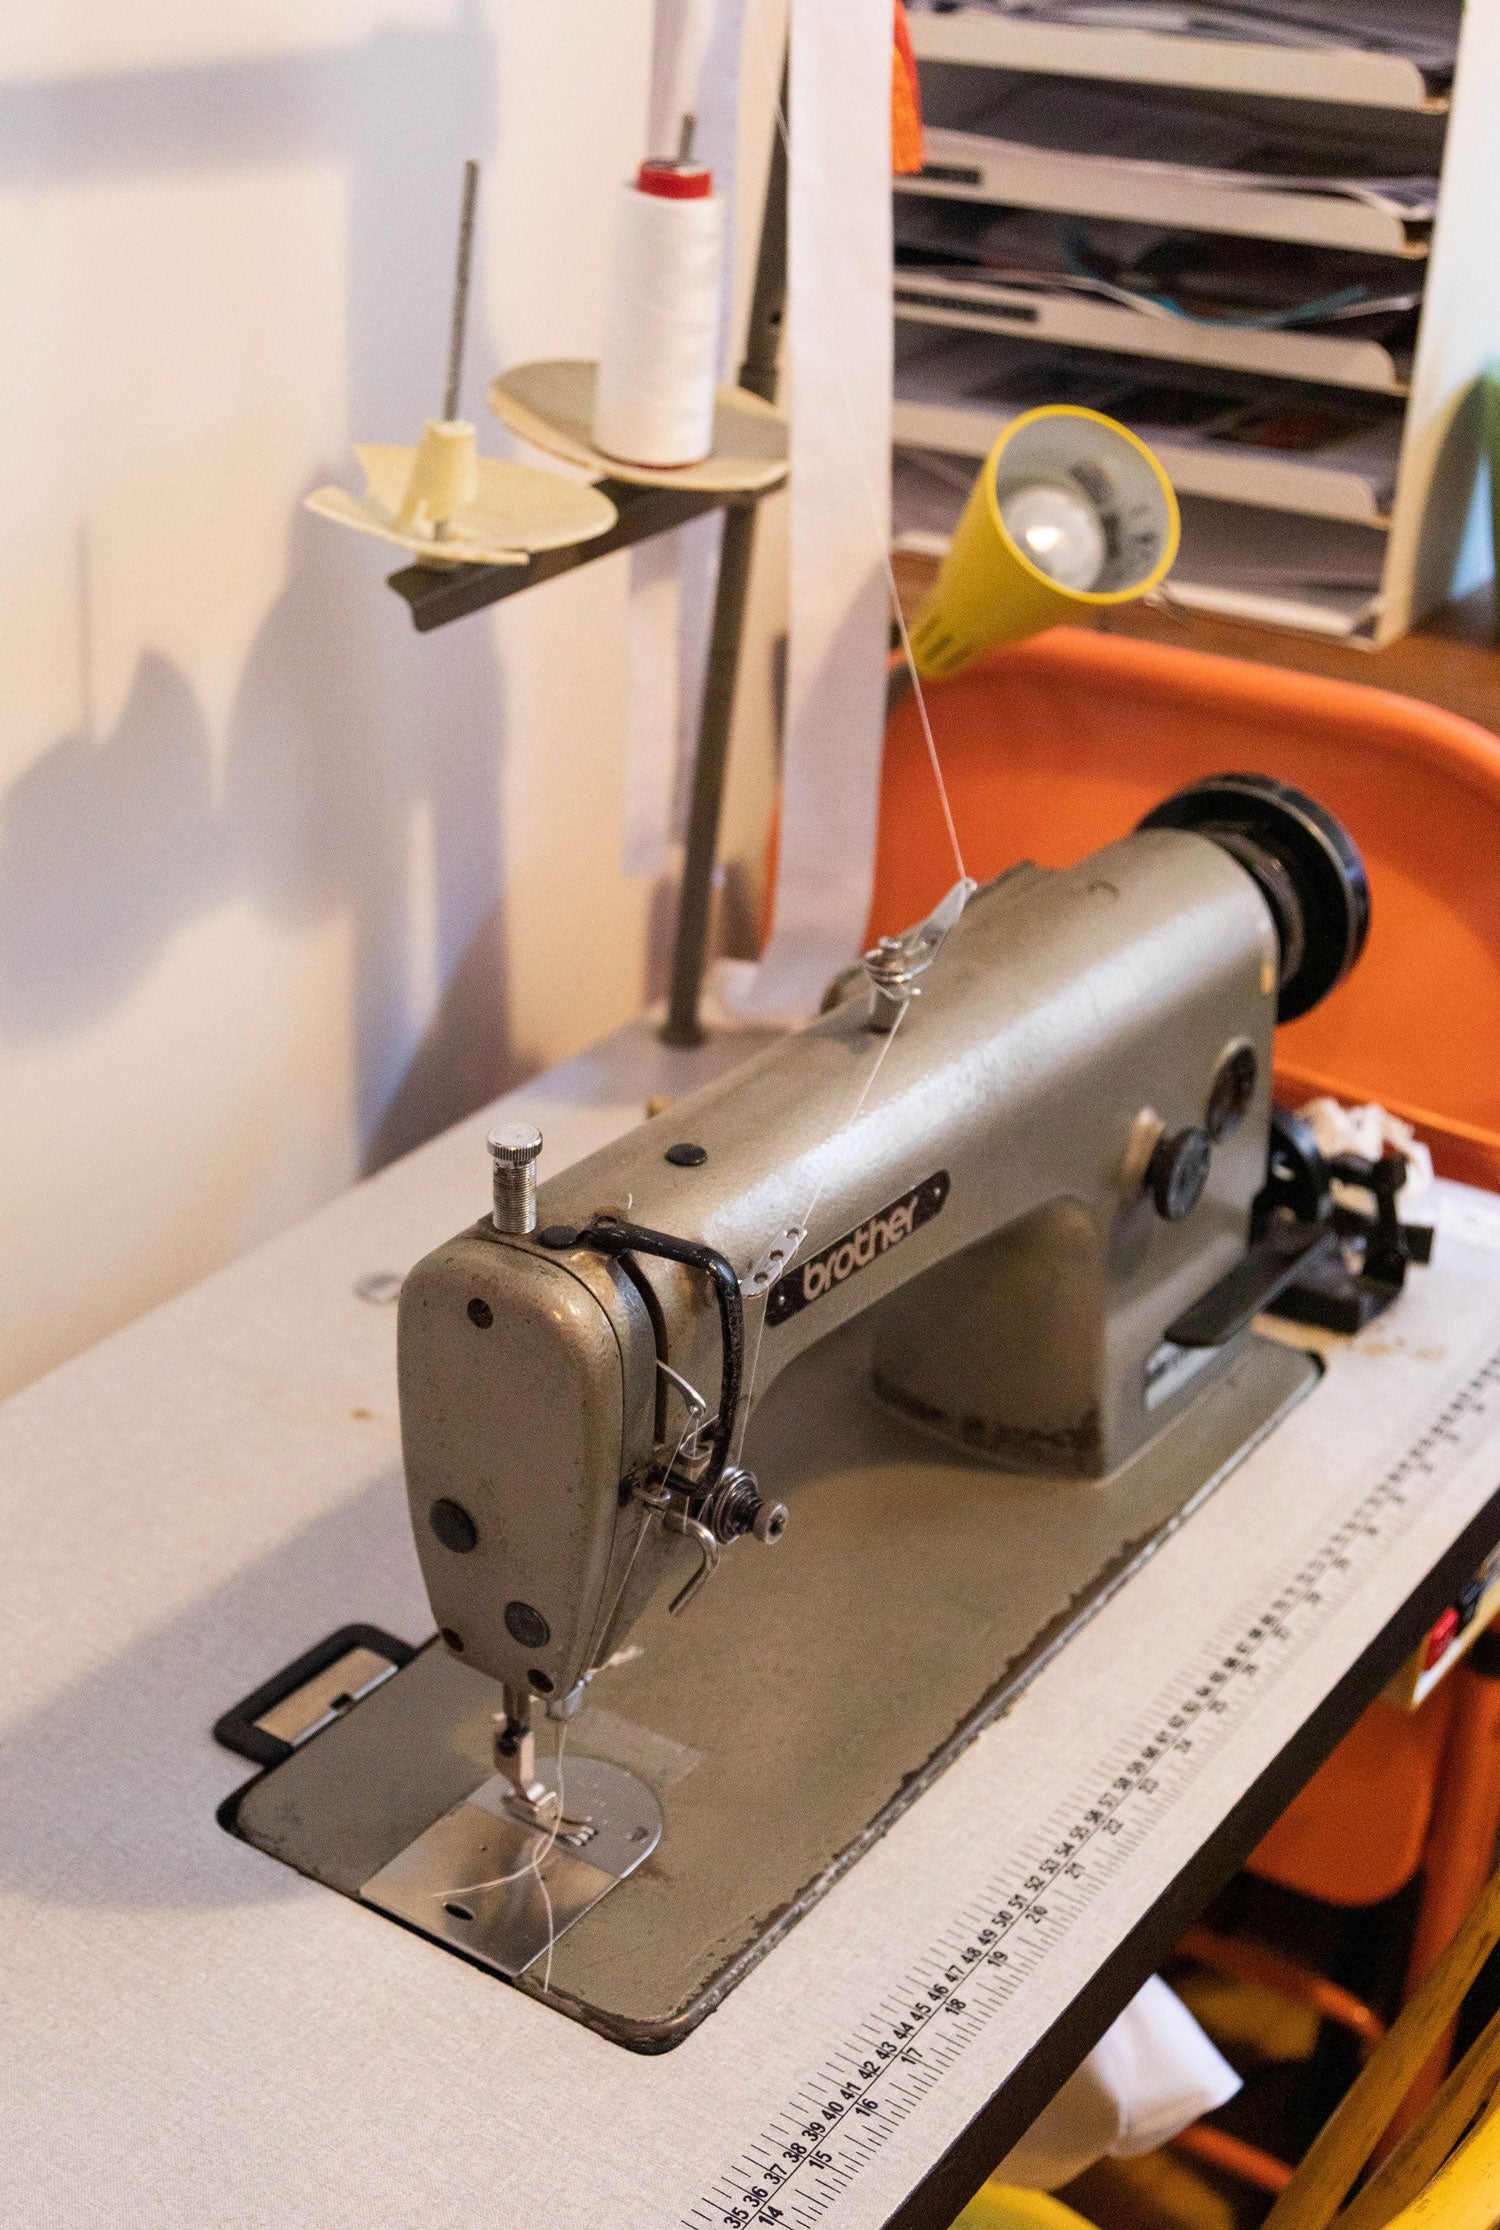 Industrial sewing machine in the Saywood studio, for sewing toiles during the design and development process.